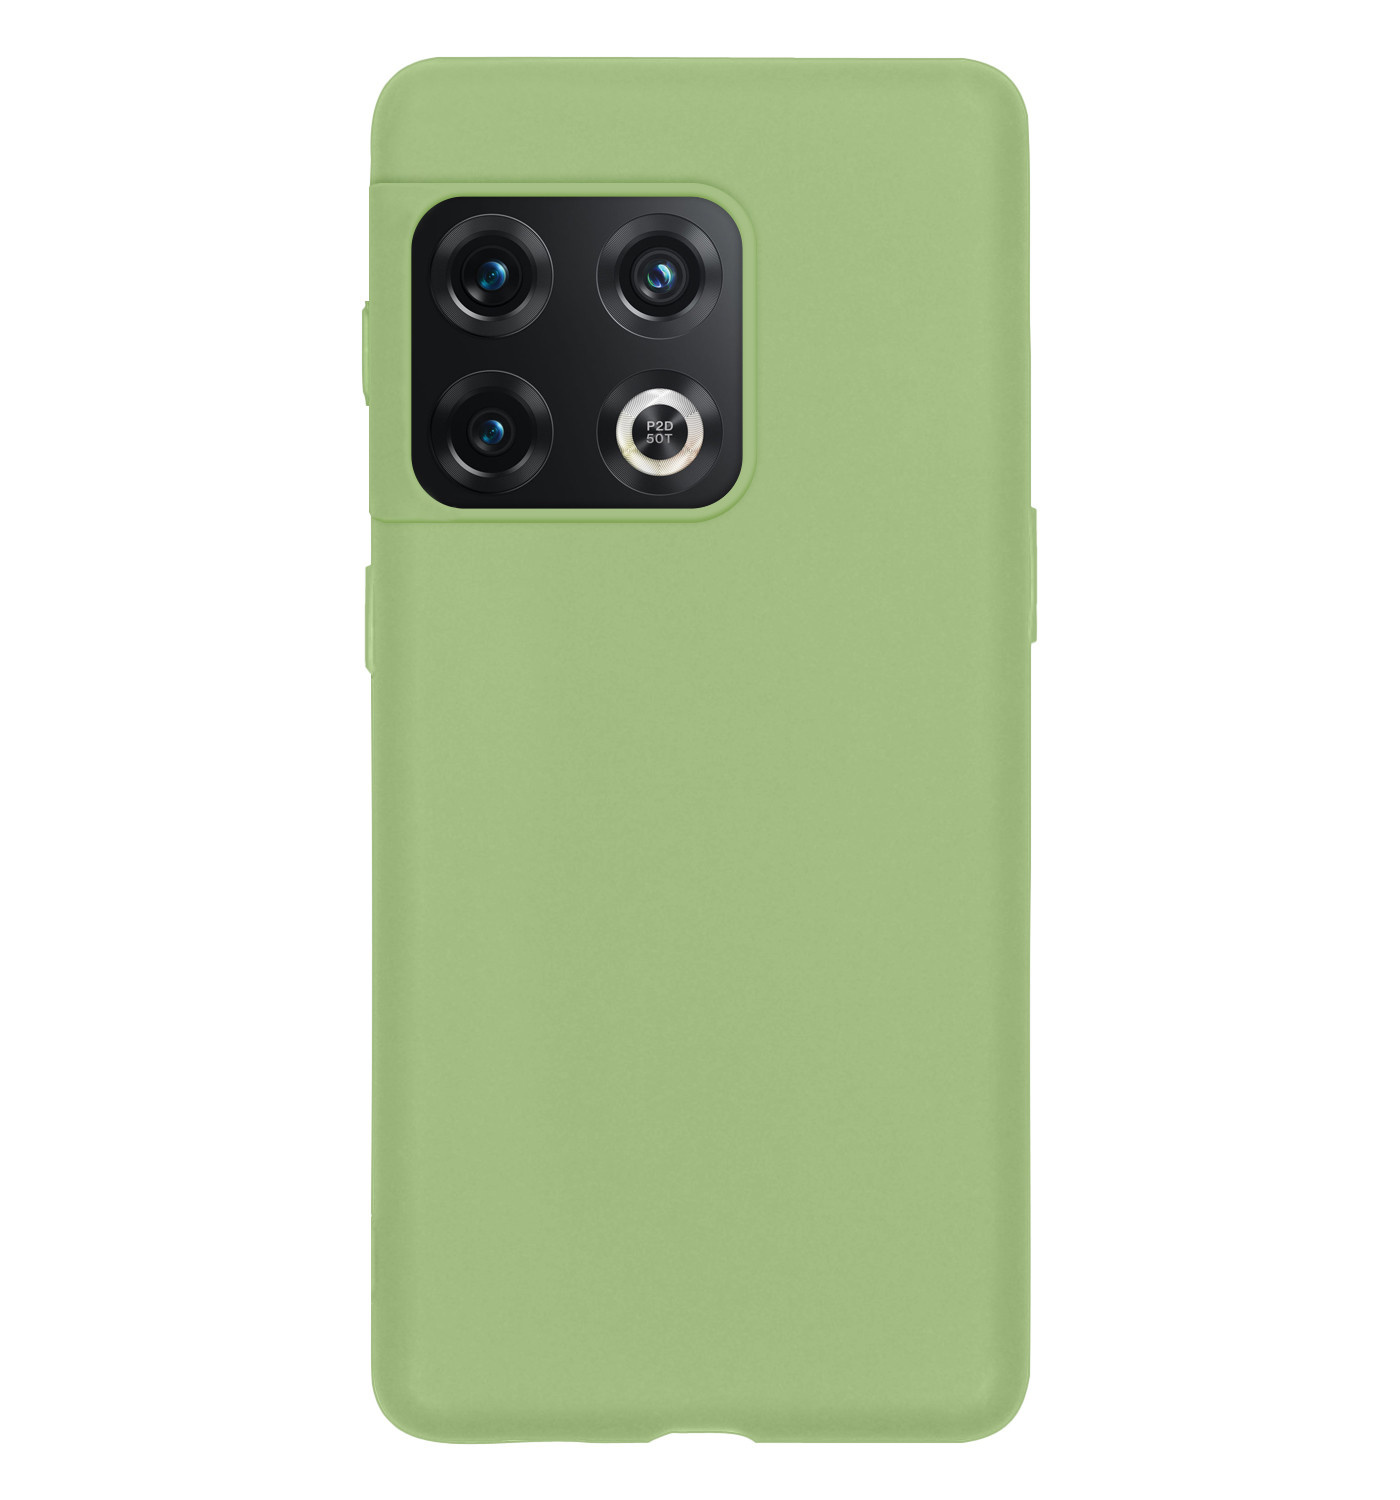 Nomfy OnePlus 10 Pro Hoesje Siliconen - OnePlus 10 Pro Hoesje Groen Case - OnePlus 10 Pro Cover Siliconen Back Cover - Groen